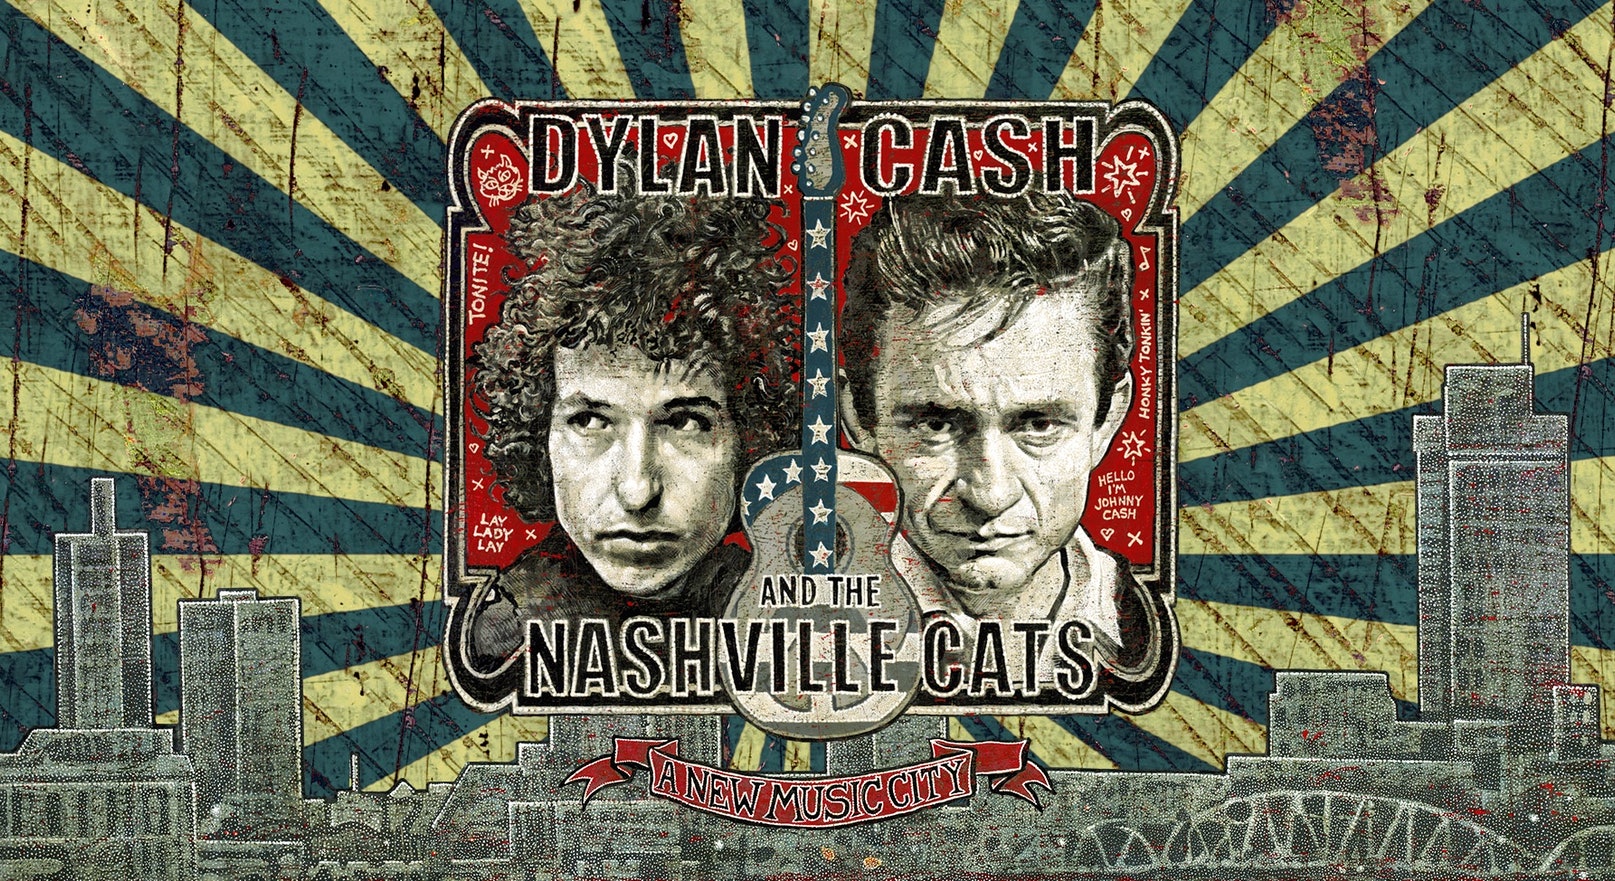 Dylan, Cash, and the Nashville Cats: A New Music City - The 